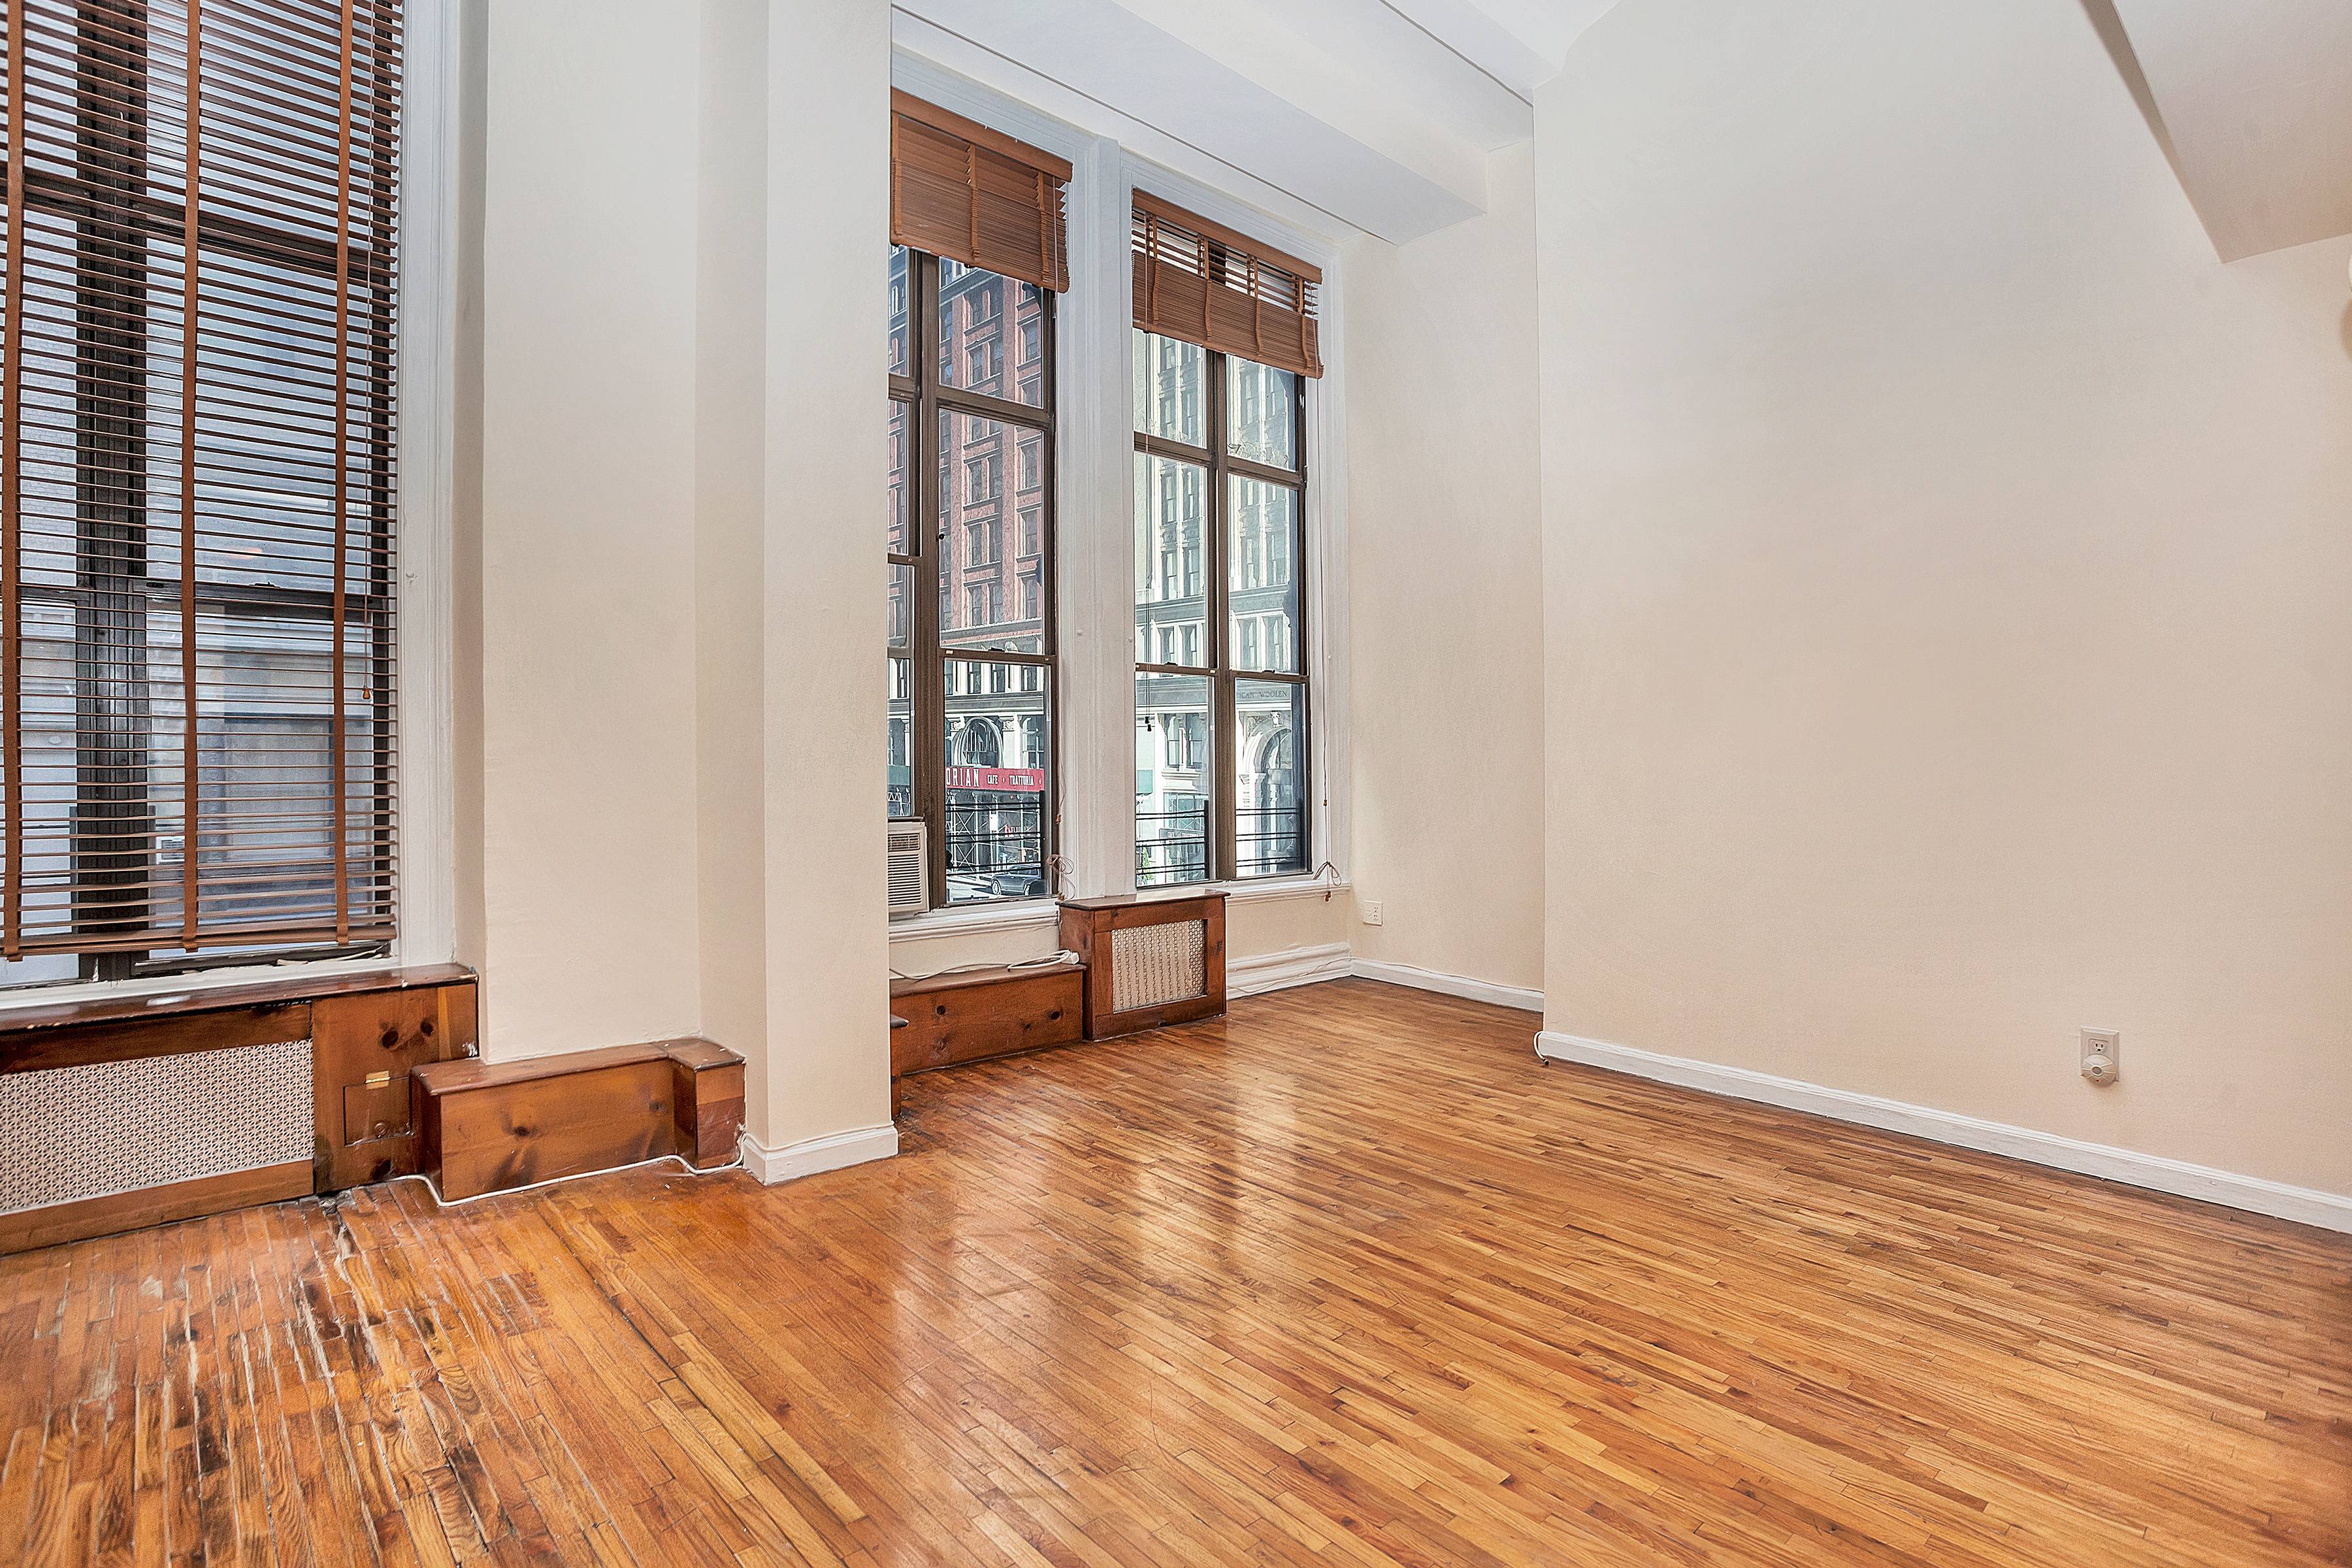 Flatiron Large Studio, 15FT Ceilings, Sun-Blasted, Over Sized Windows, Parlor Floor 1 Block From Union Square